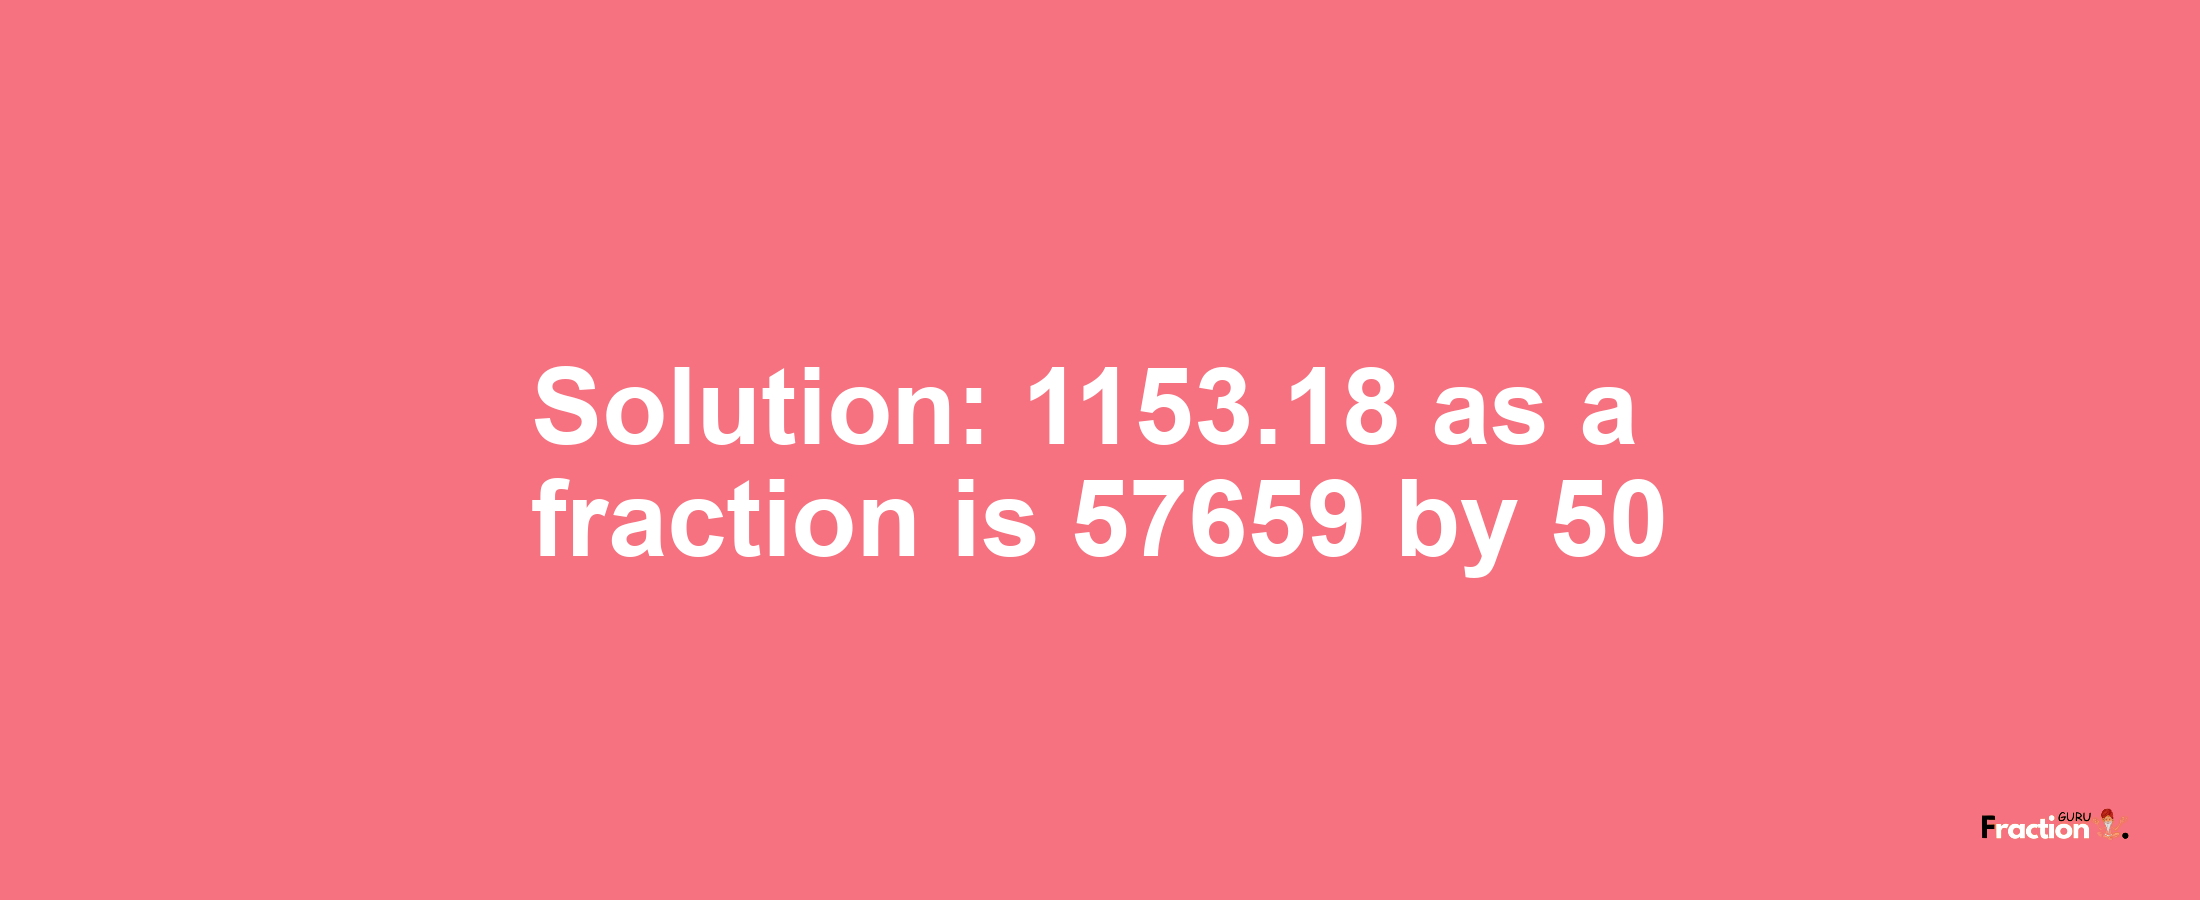 Solution:1153.18 as a fraction is 57659/50